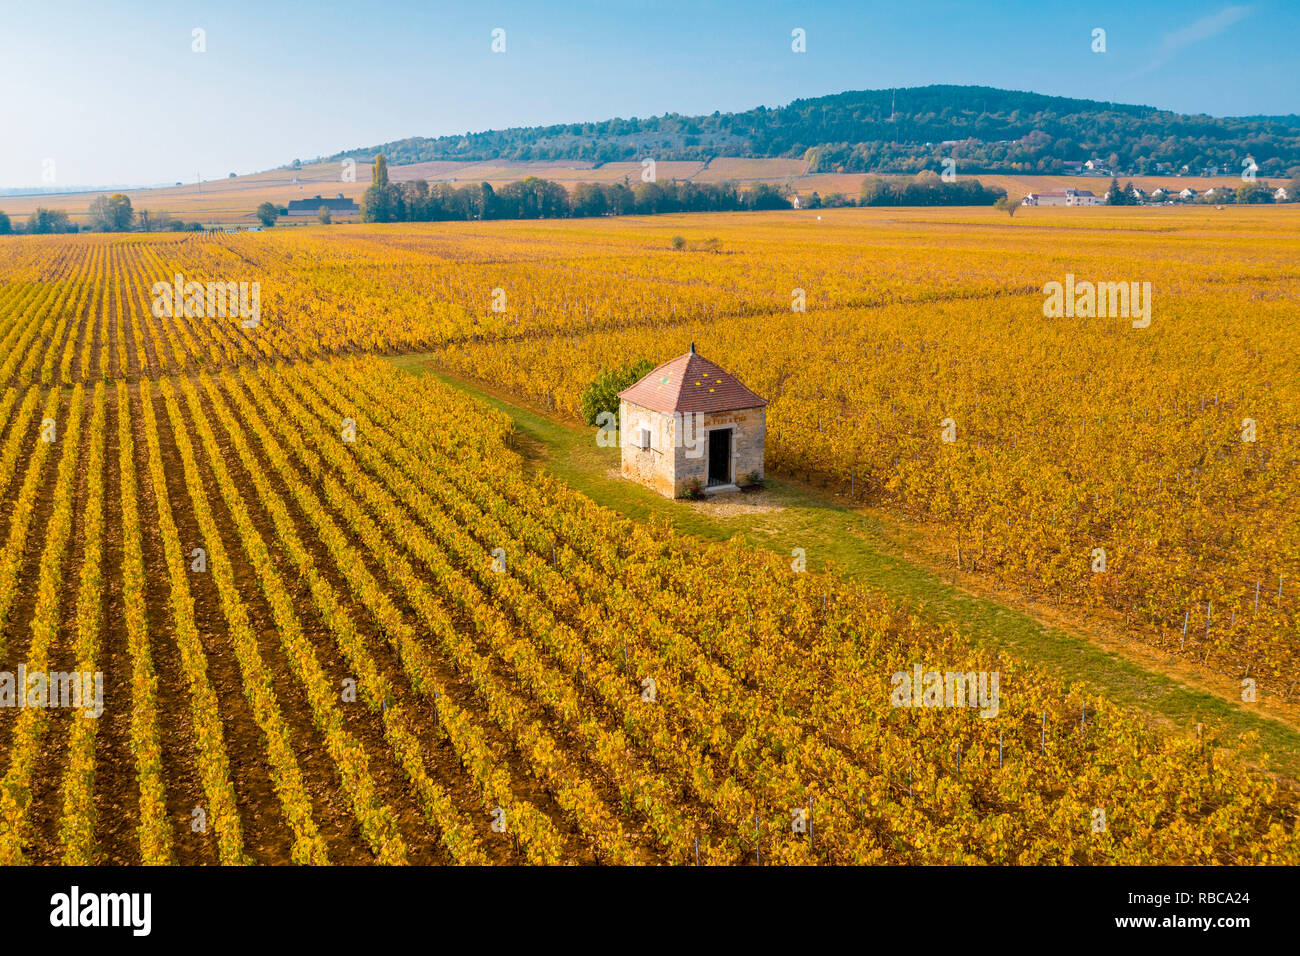 France, Bourgogne-Franche-Comte, Burgundy, Cote-d'Or, Cote de Beaune.  Typical barn in the vineyards Stock Photo - Alamy